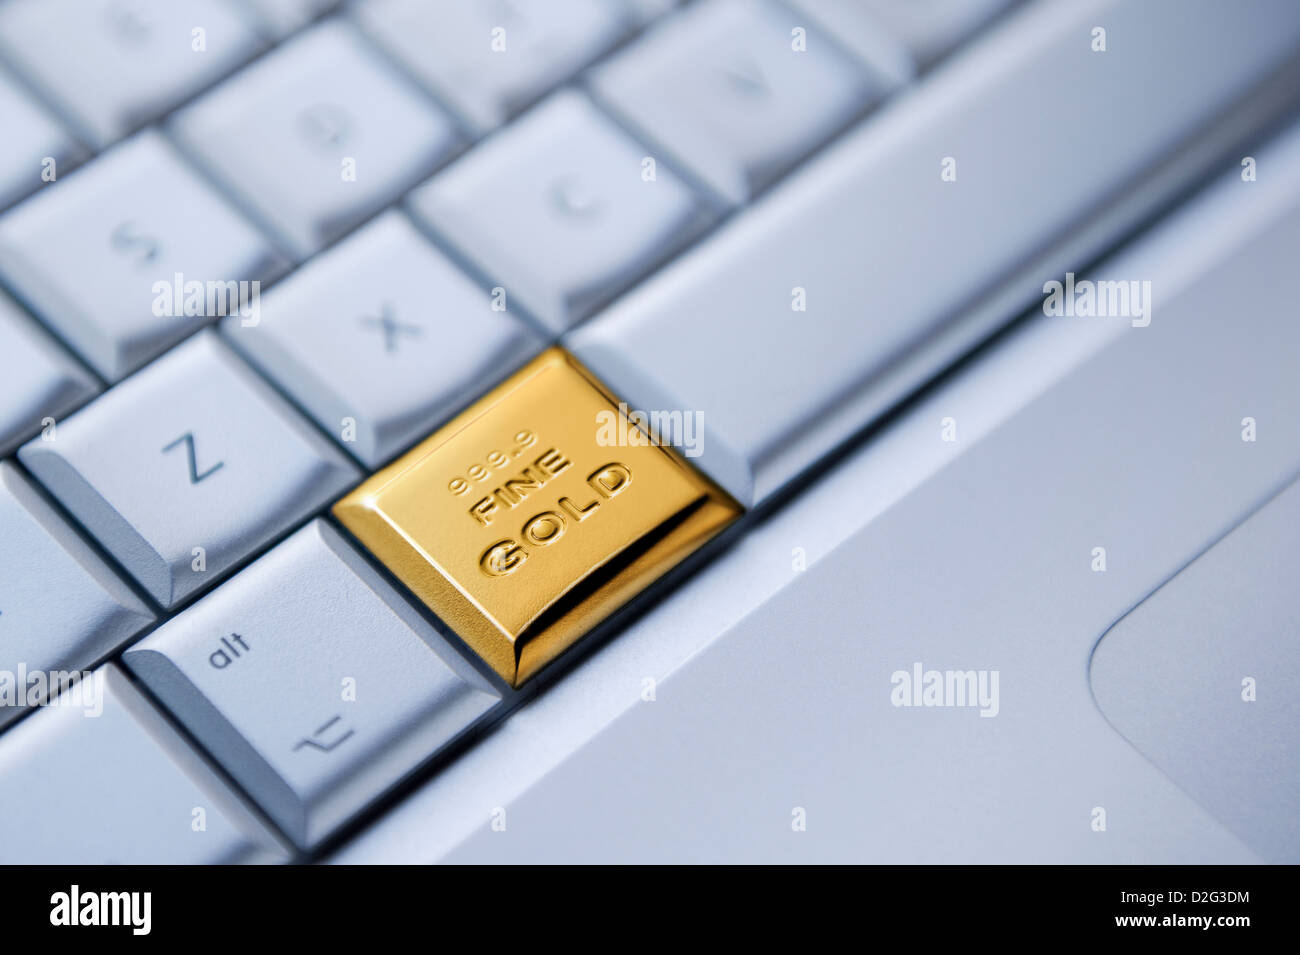 Detail of a keyboard with one key as a solid gold bar - online business / moneymaking / gold trading / stocks concept Stock Photo